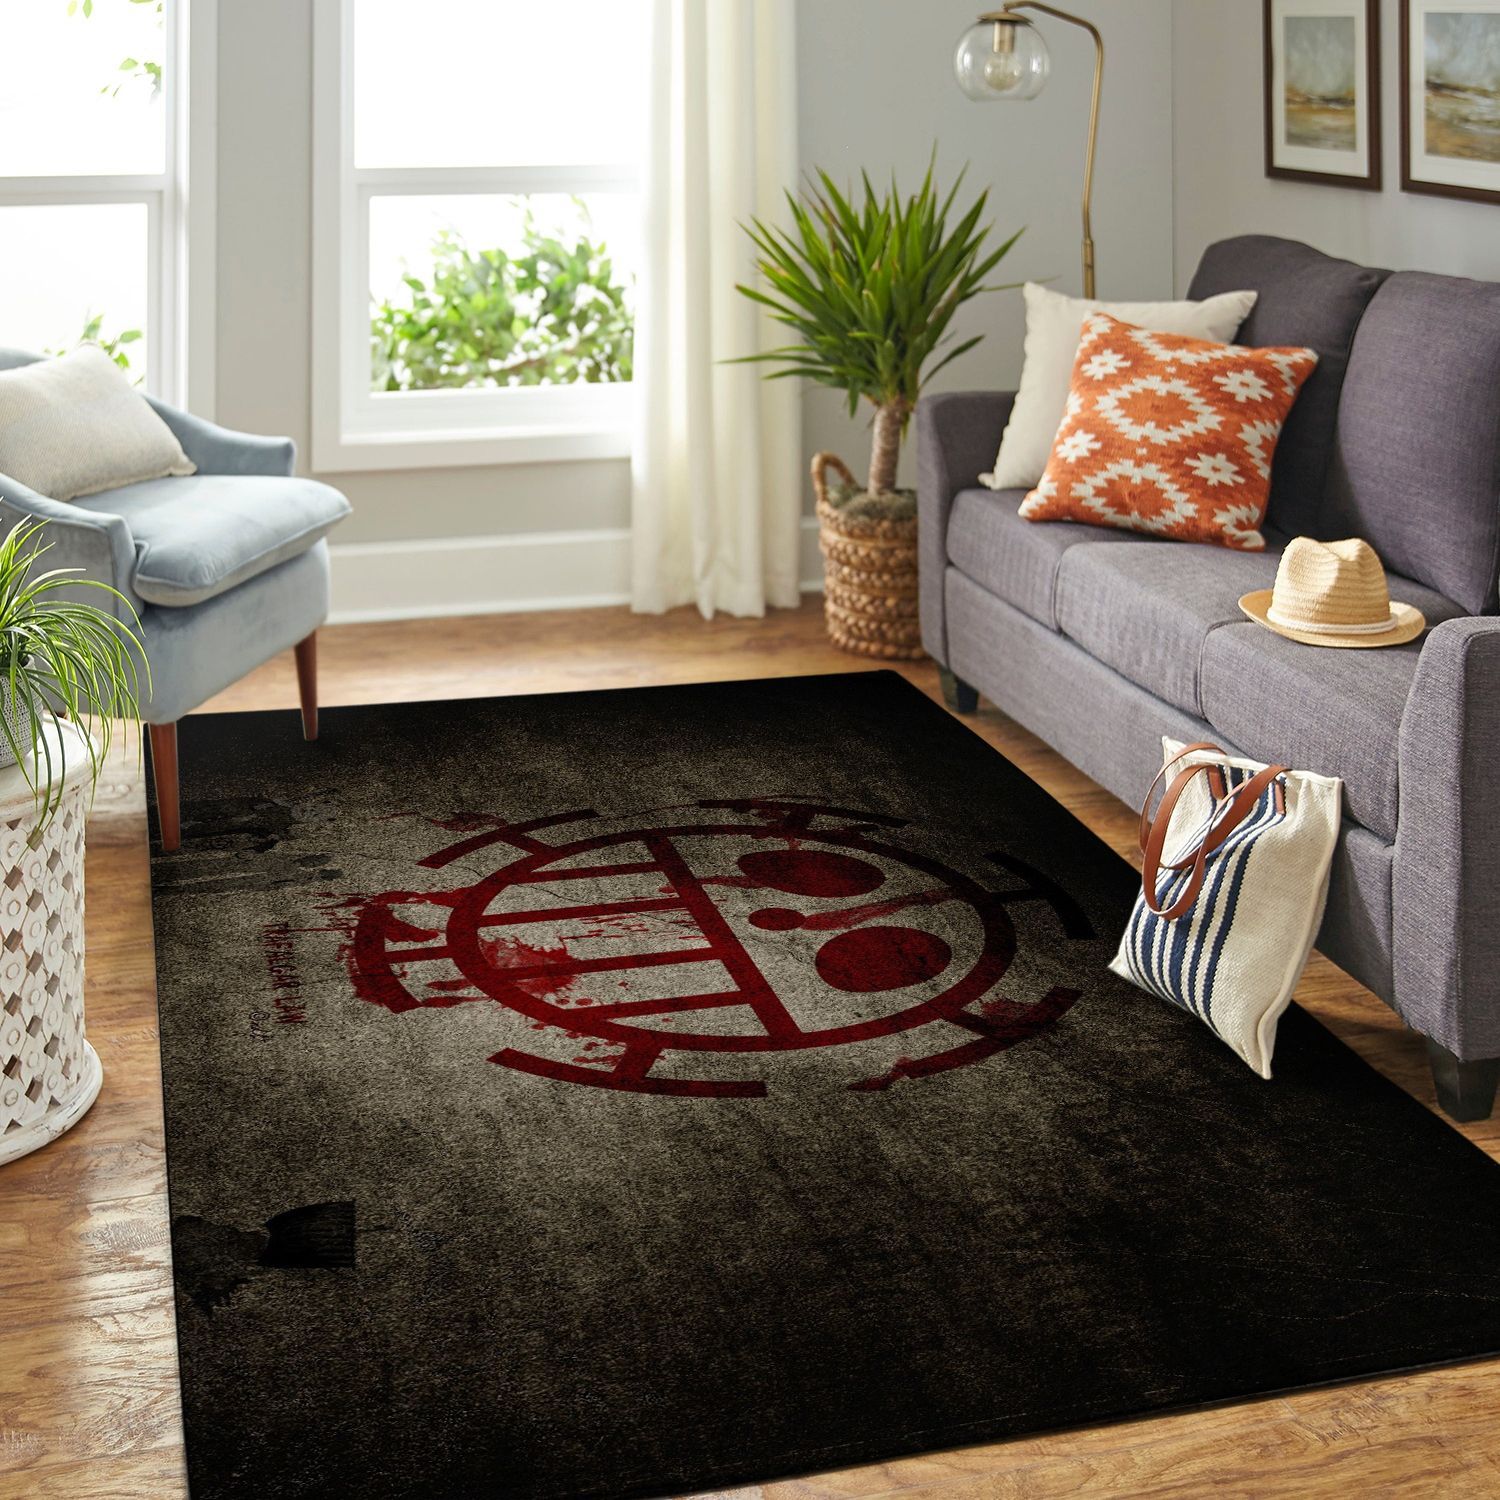 Amazon Onepiece-luffy Living Room Area No6432 Rug